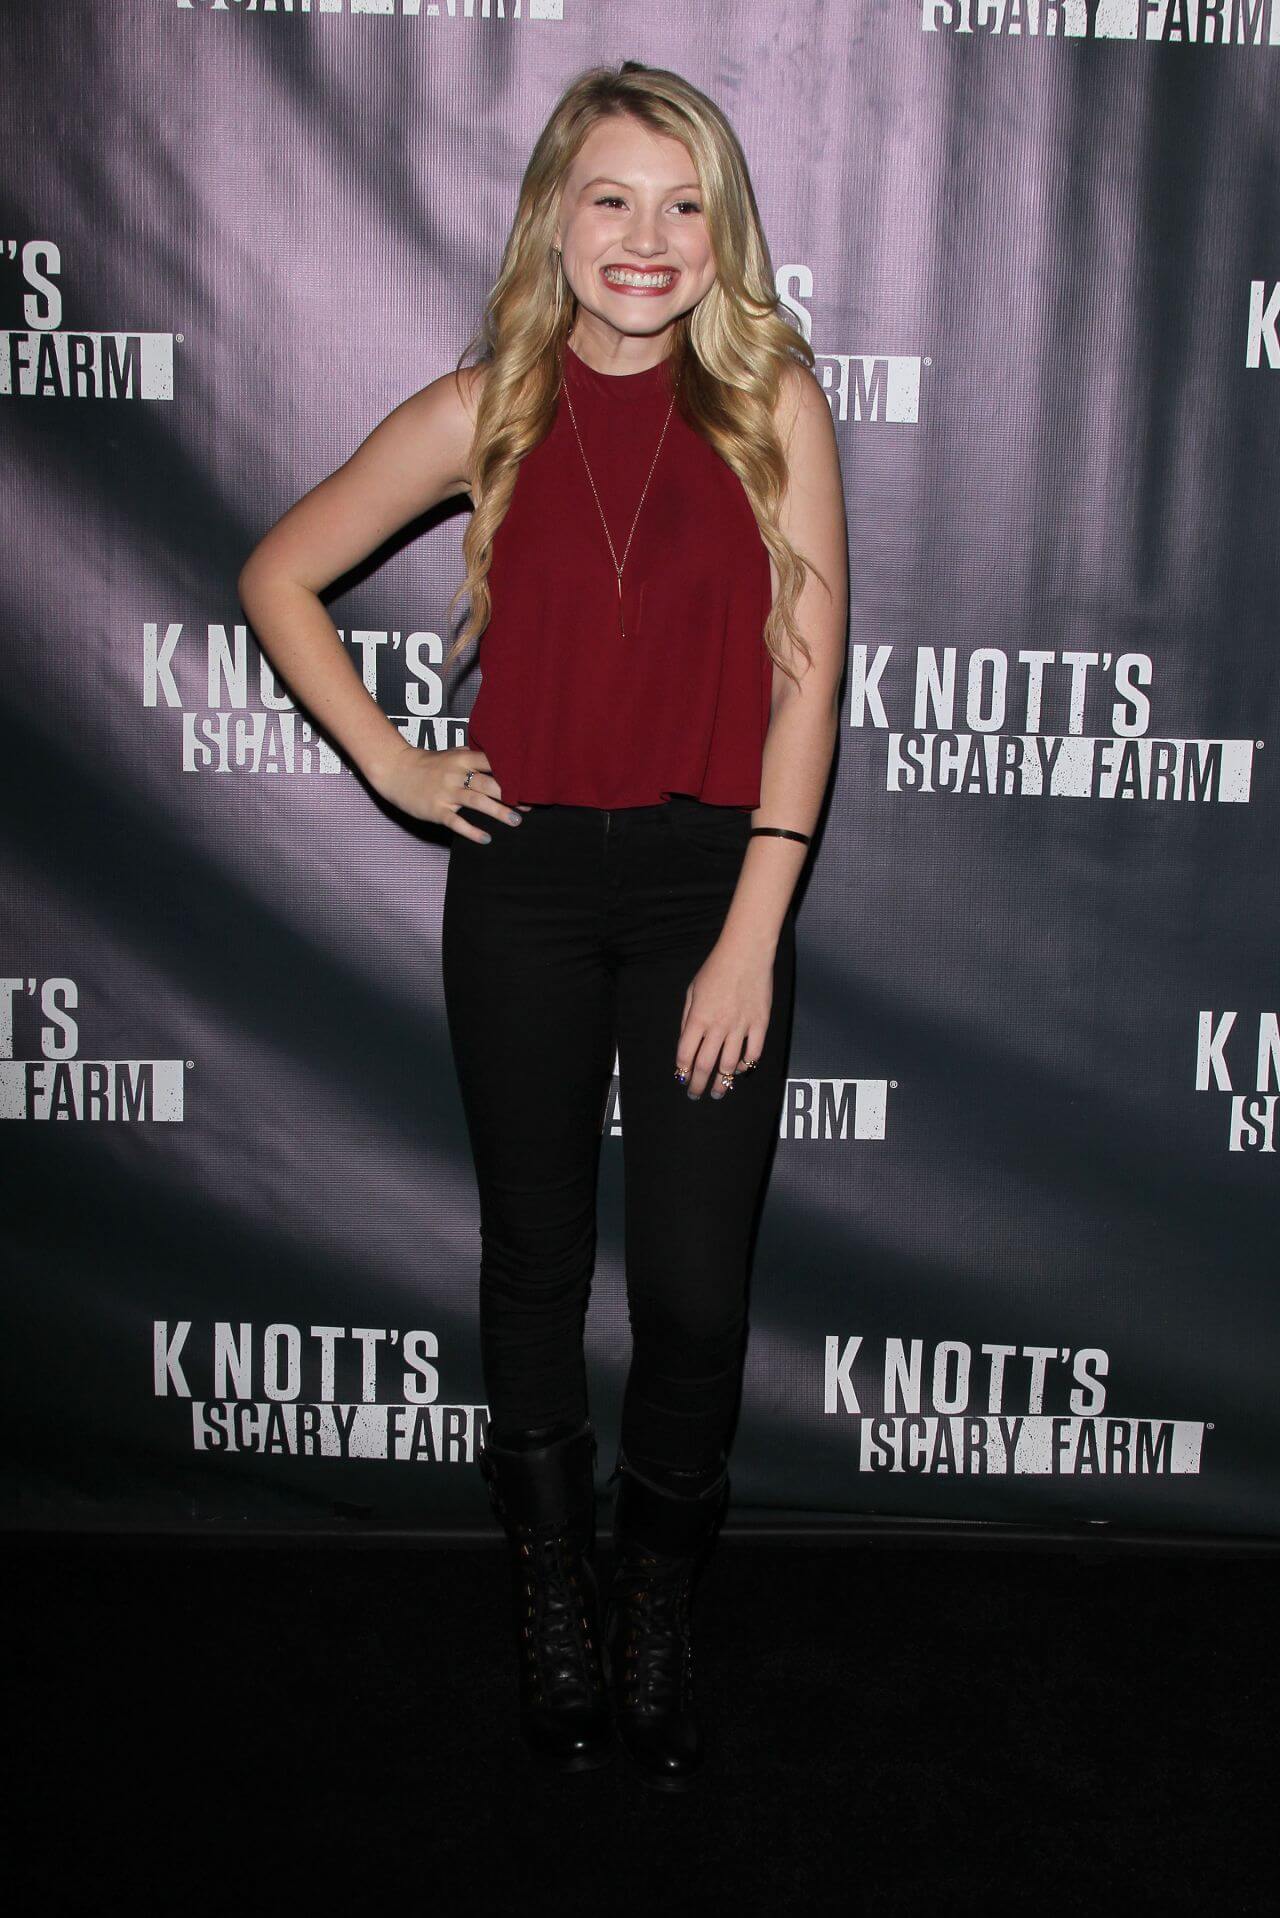 Brooke Sorenson  In Maroon Top With Black Jeans At Knott’s Scary Farm Black Carpet in Buena Park